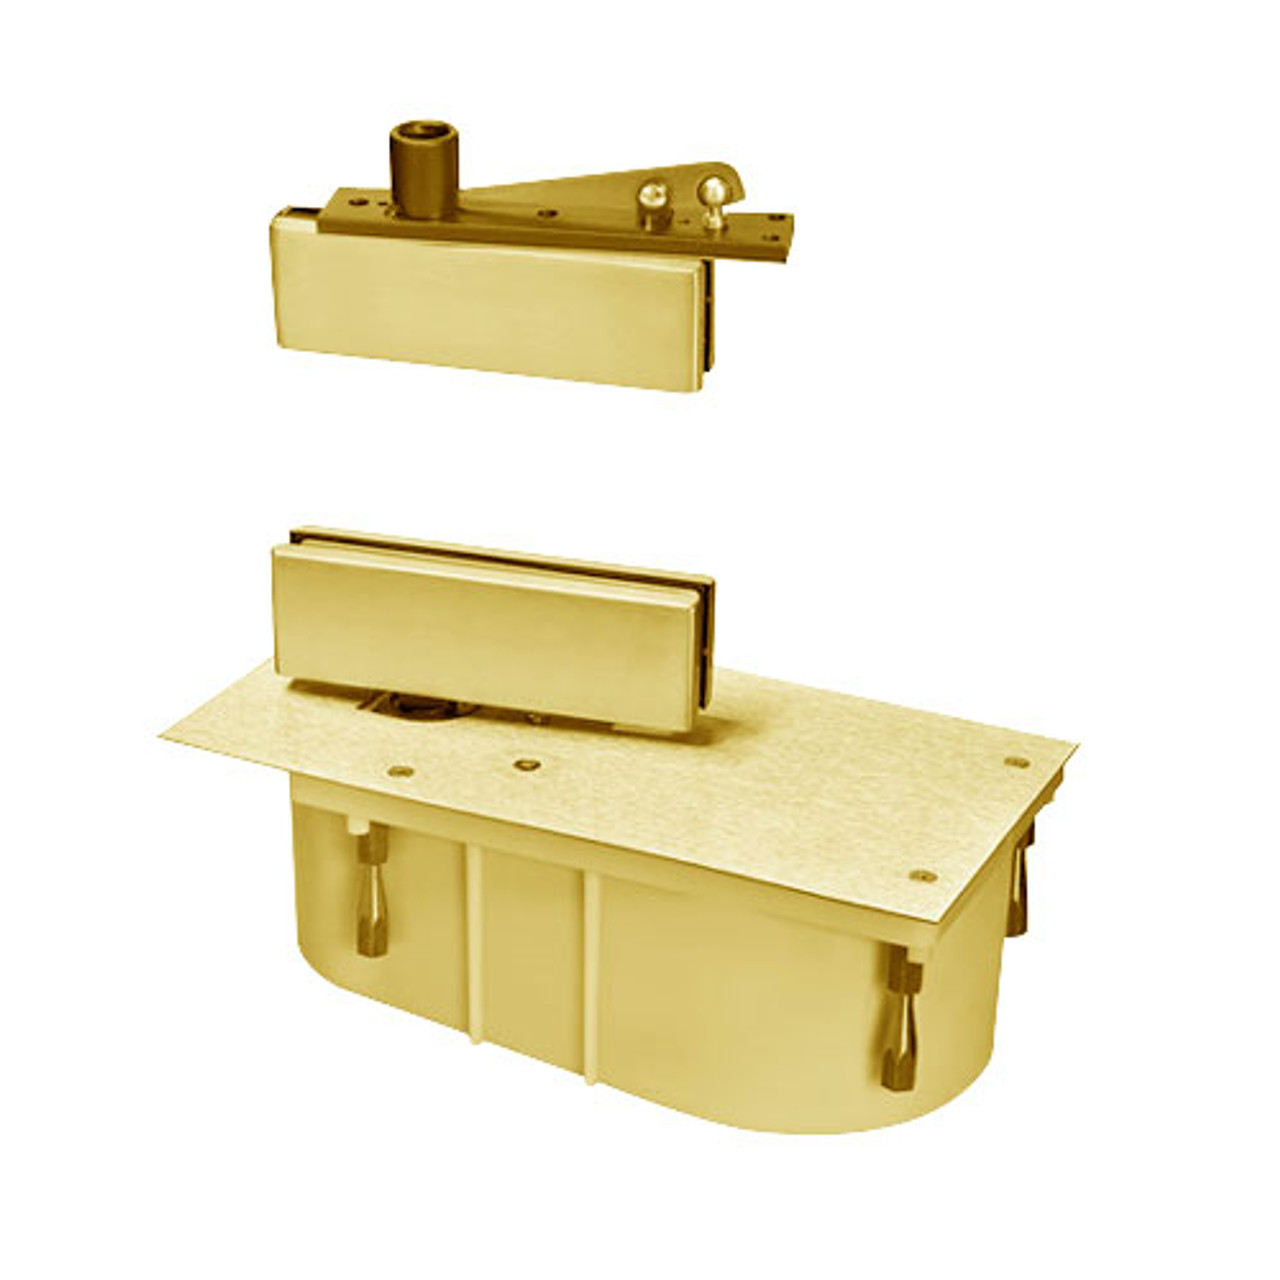 428-105N-CWF-RH-605 Rixson 428 Series Heavy Duty Single Acting Center Hung Floor Closer with Patch Fittings in Bright Brass Finish